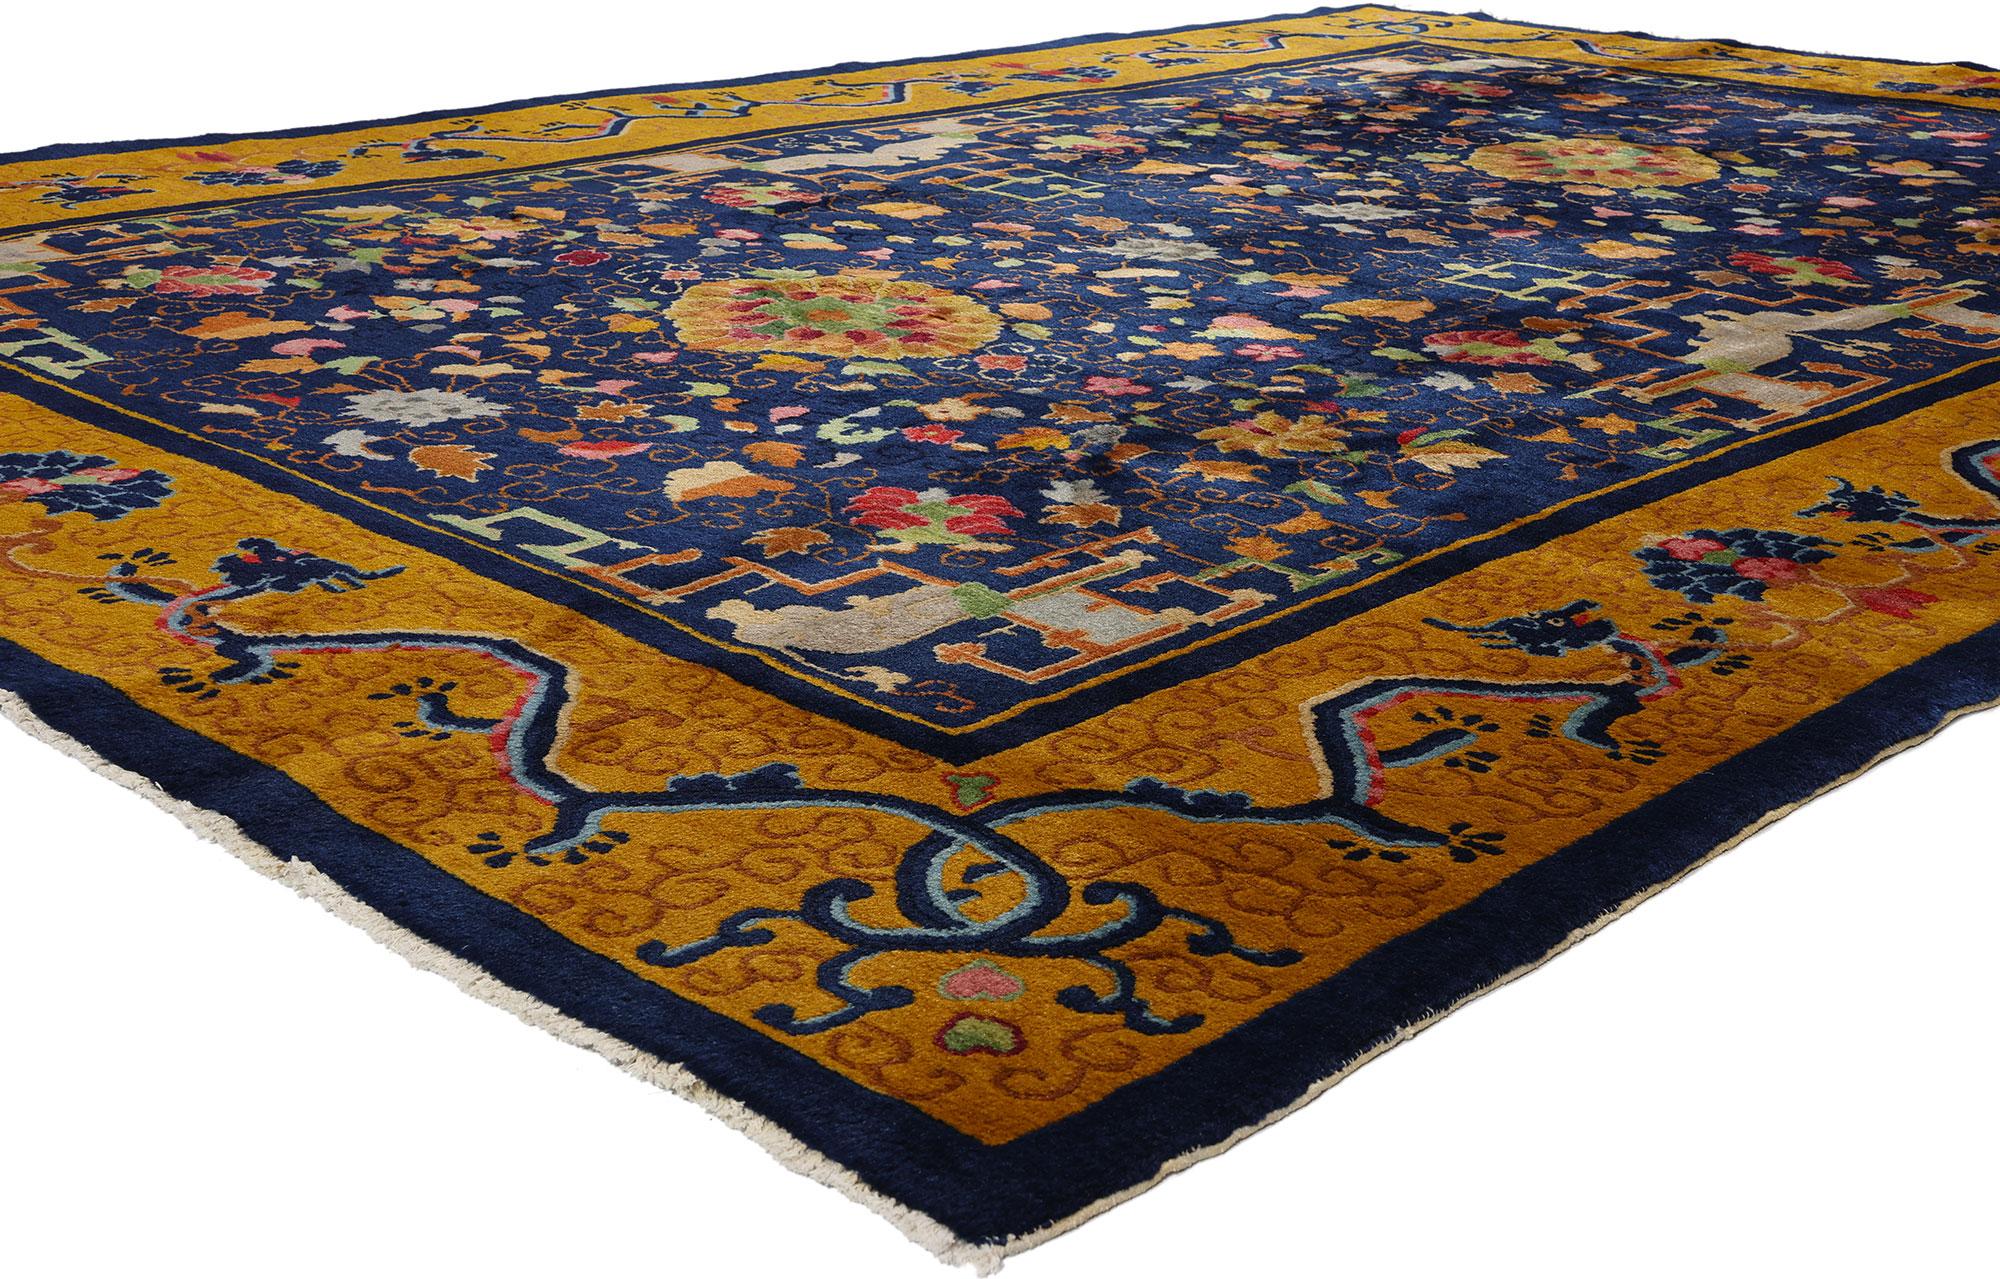 53874 Antique Chinese Art Deco Rug, 07'06 x 10'08. Chinese Art Deco rugs originated in China during the 1920s and 1930s, reflecting the bold geometric patterns, vibrant colors, and luxurious materials characteristic of the Art Deco movement. These